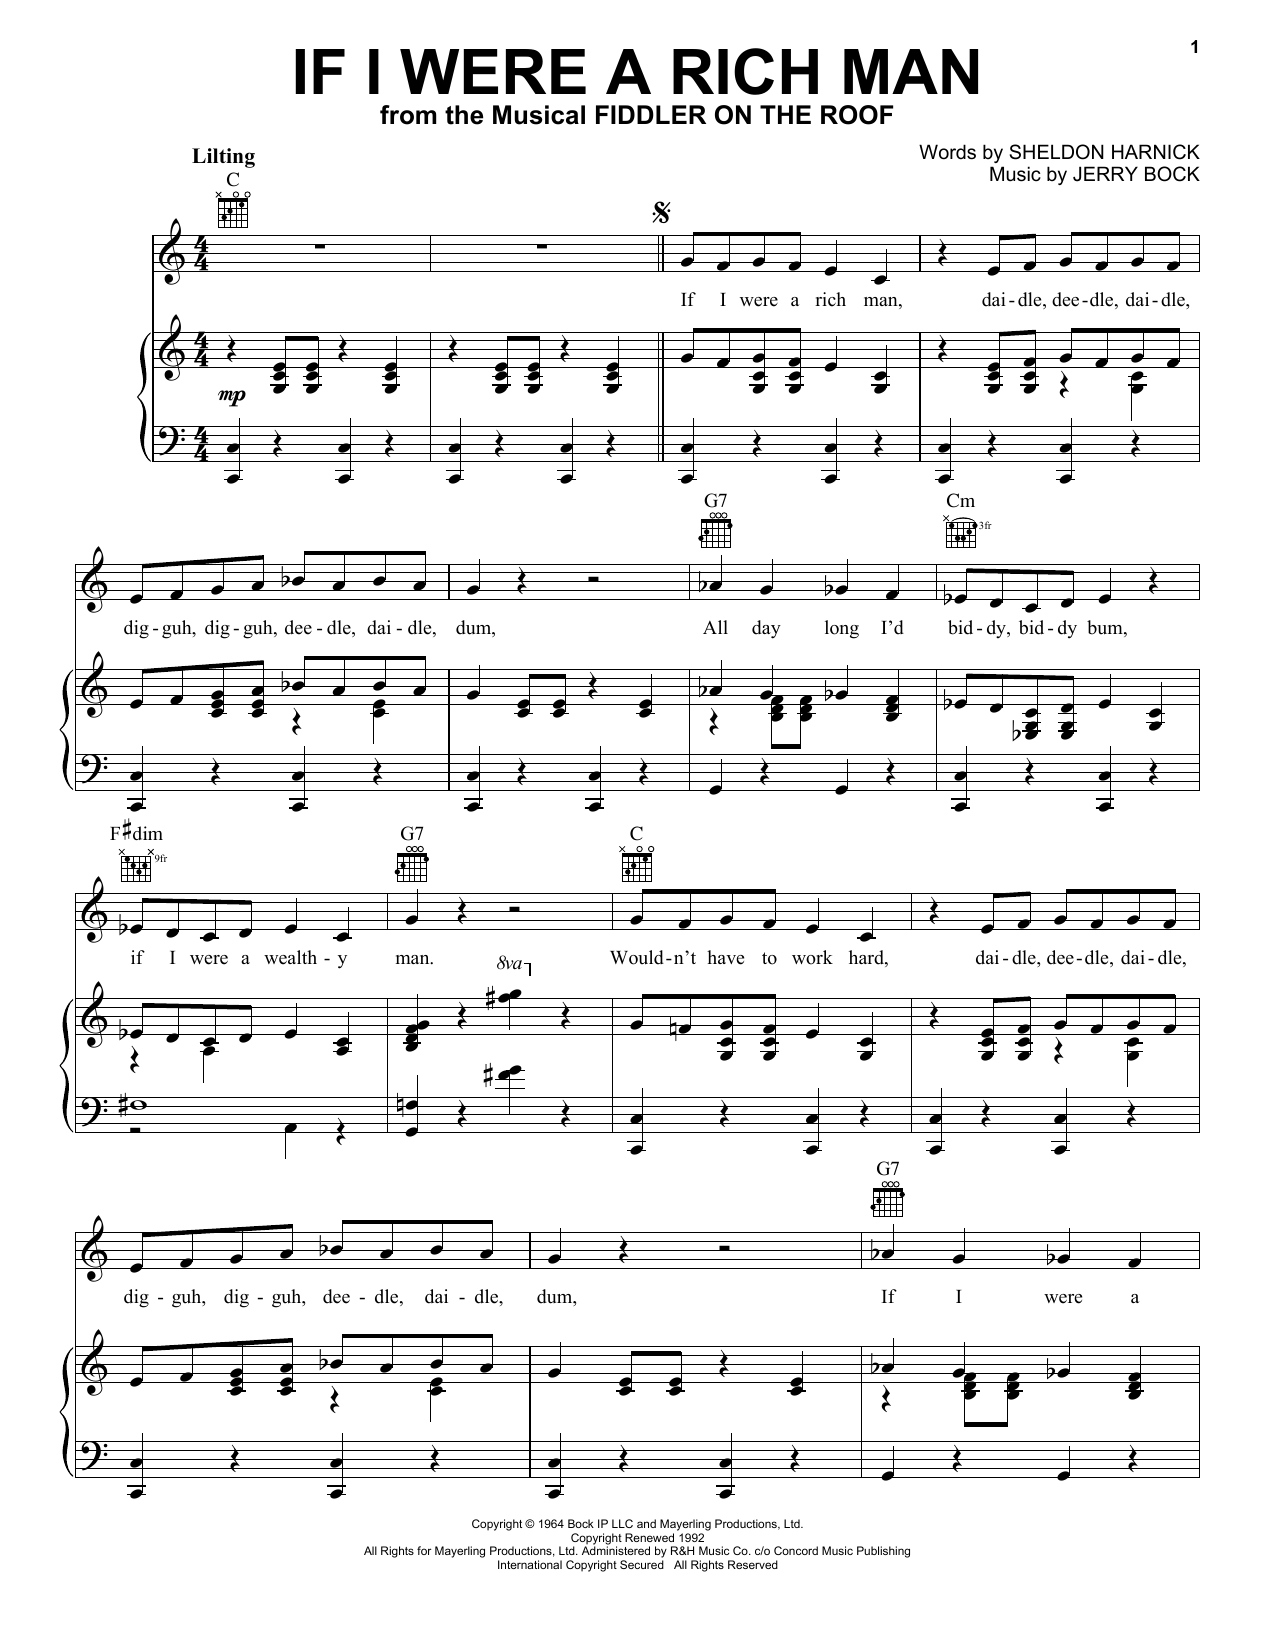 Bock Harnick If I Were A Rich Man From Fiddler On The Roof Sheet Music Download Pdf Score 101582